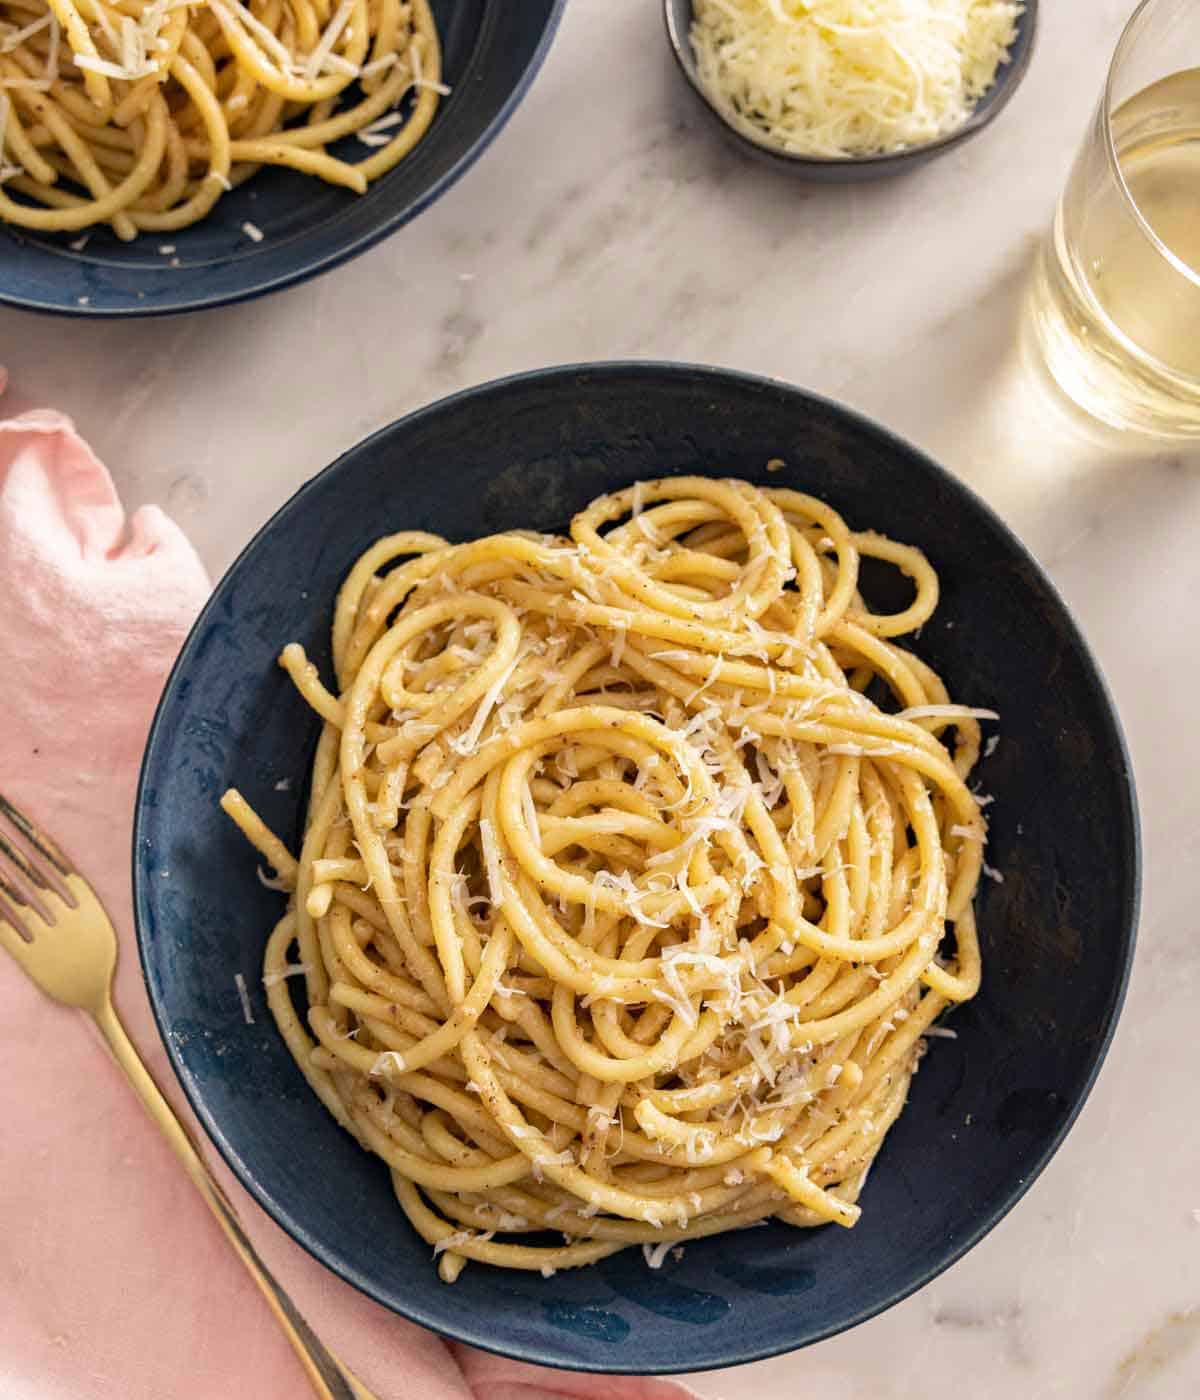 Overhead view of a plate of cacio e pepe by a fork, linen, glass of wine, and grated cheese.